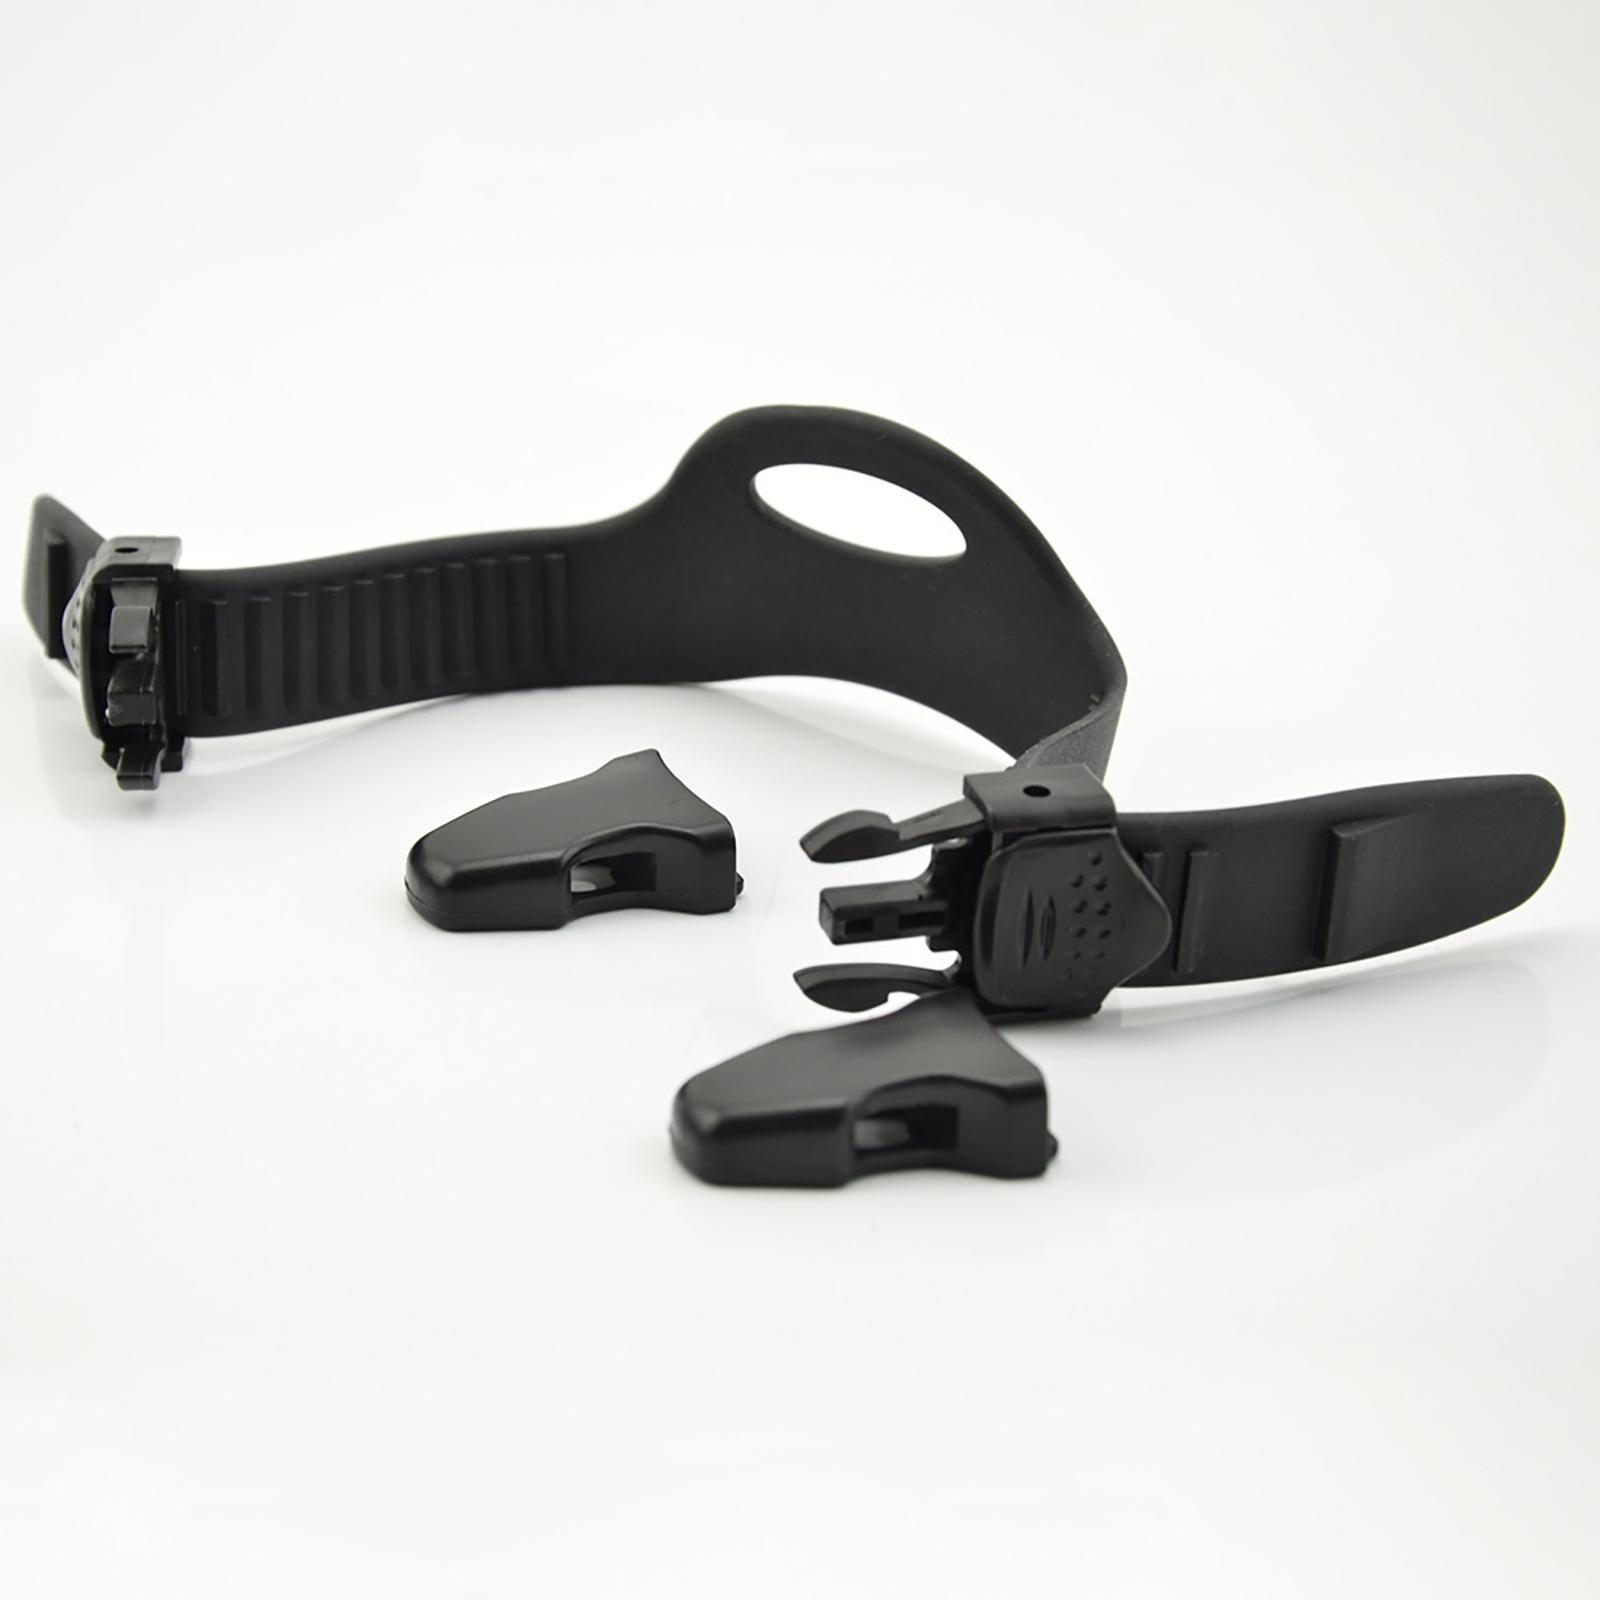 2 Pieces Diving Quick Release Fin Straps Adjustable Scuba with Buckles S